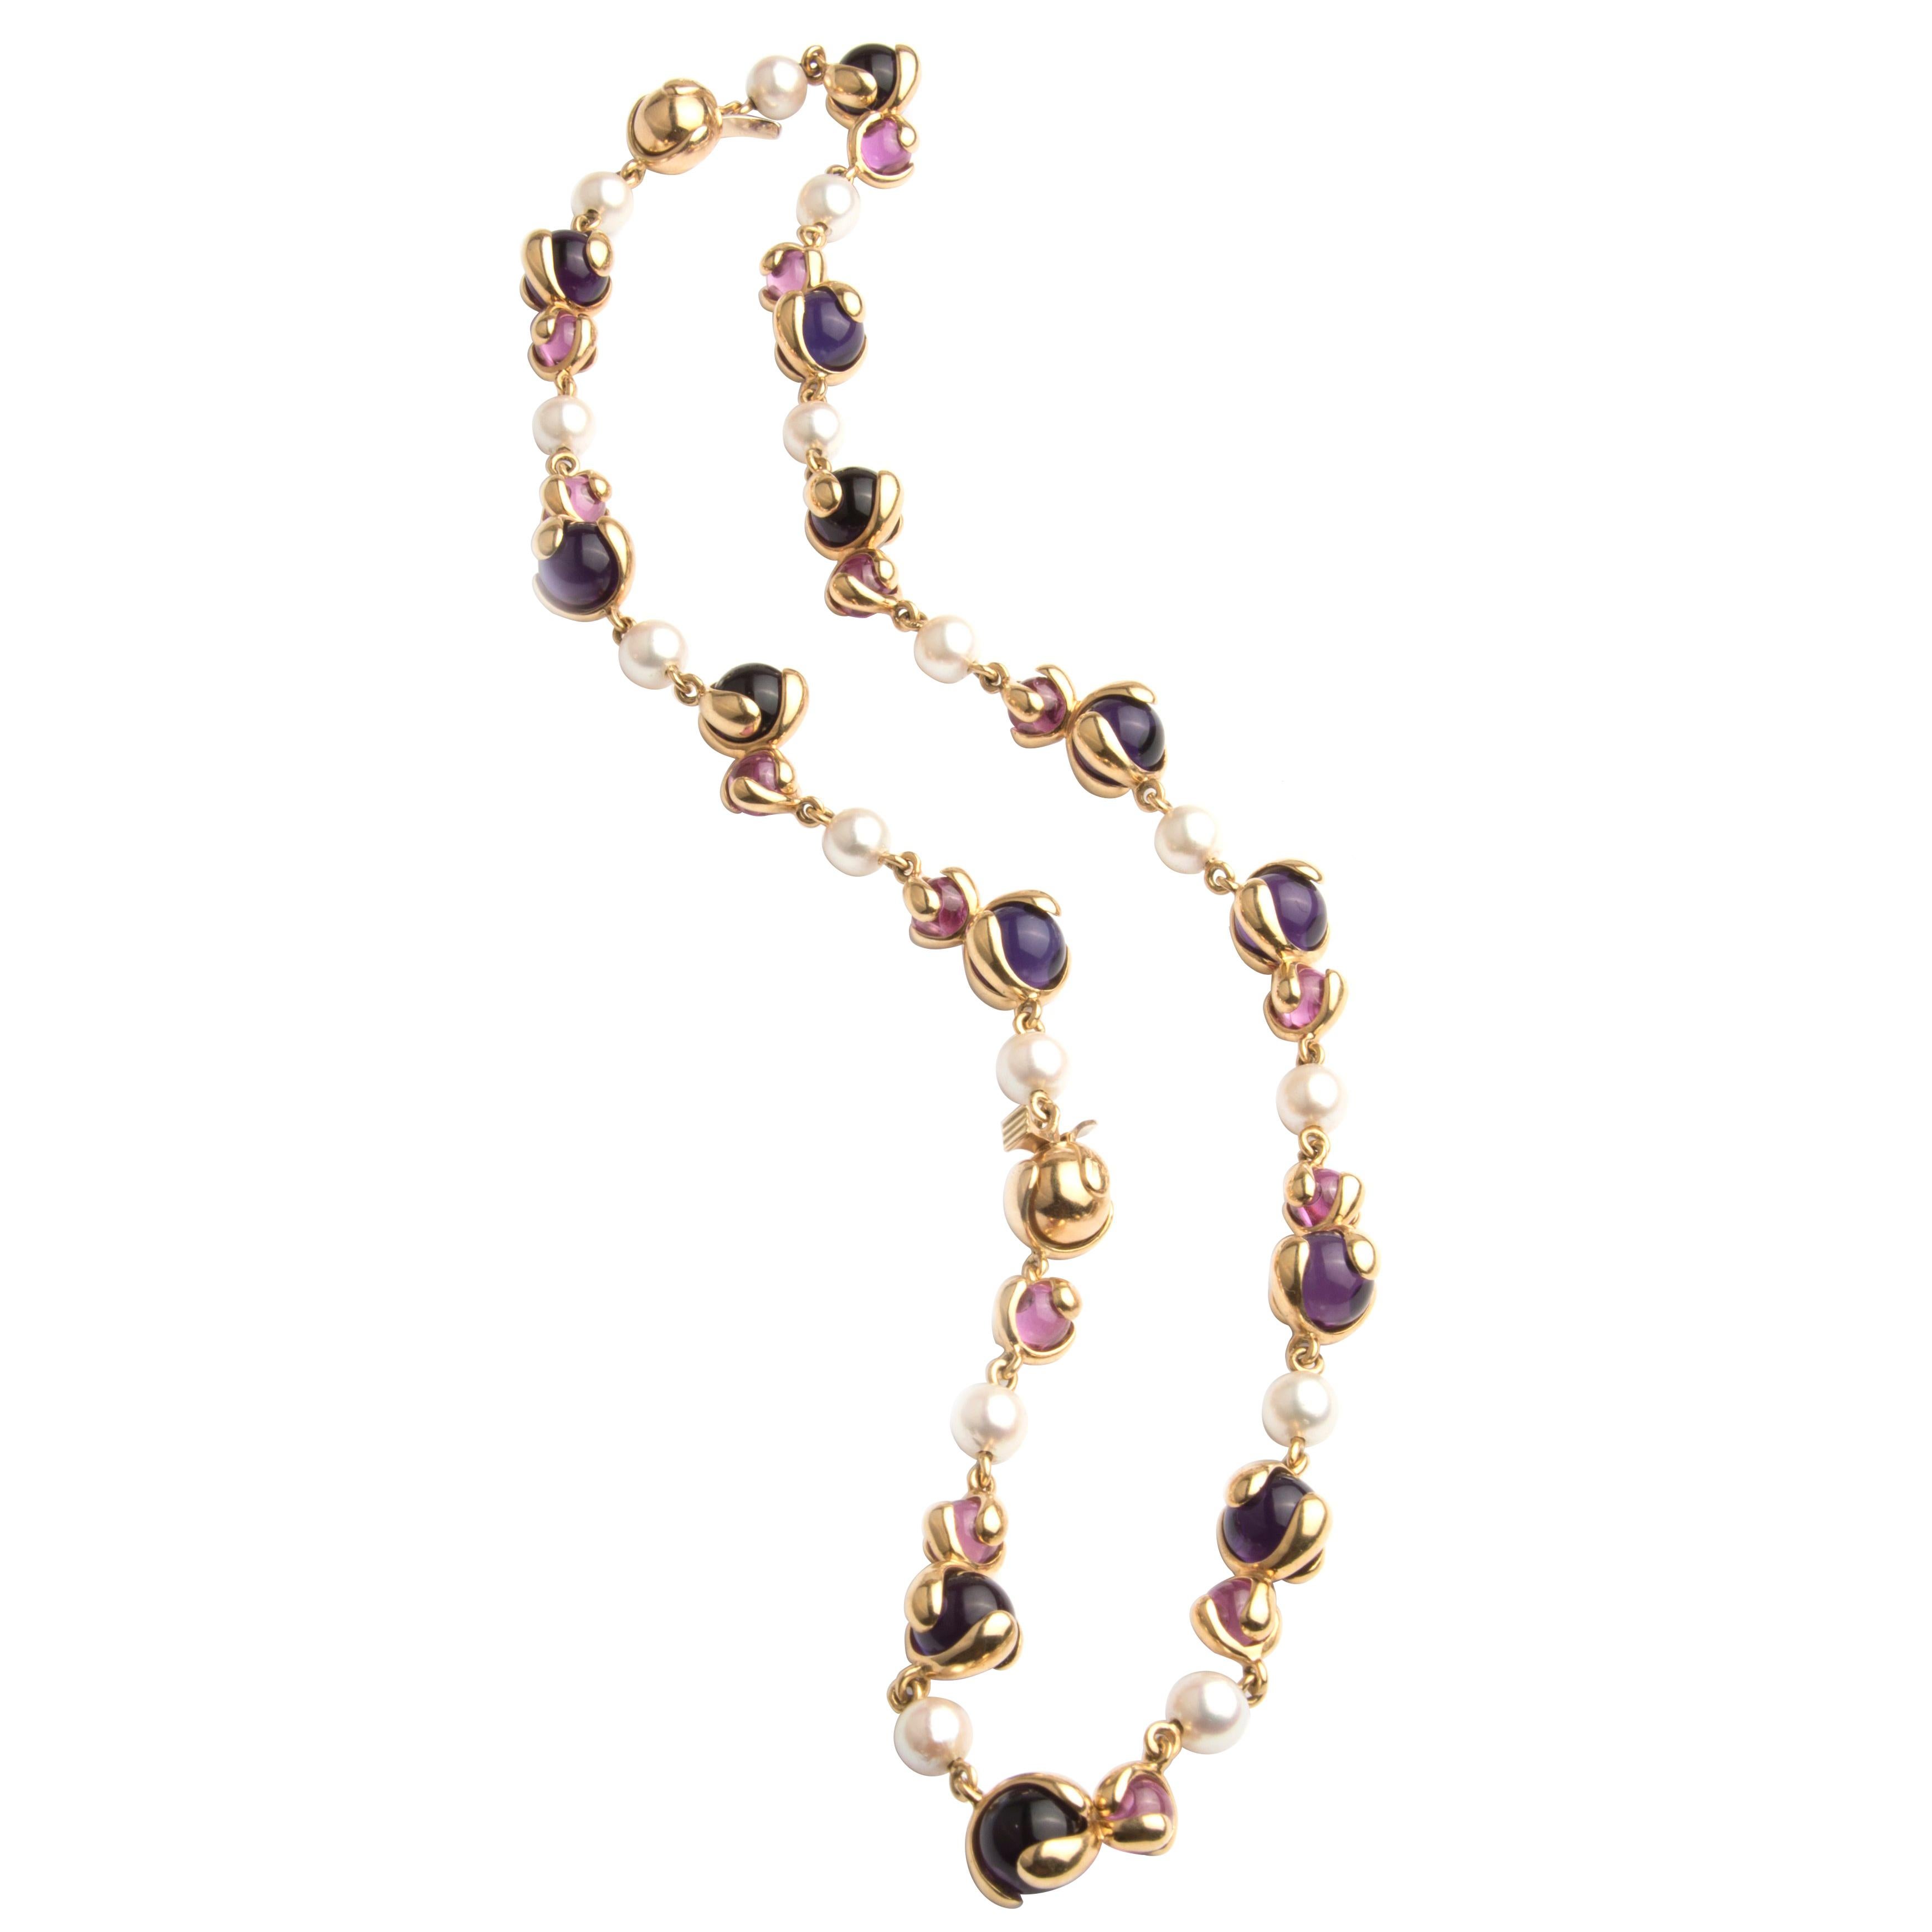 A stylish and very wearable sautoir necklace by Marina B from the Cardan collection. The multiple locks allow it to be separated into two parts, so it can also be worn as a chocker necklace and and bracelet. 
18k yellow gold with cultured pearls and